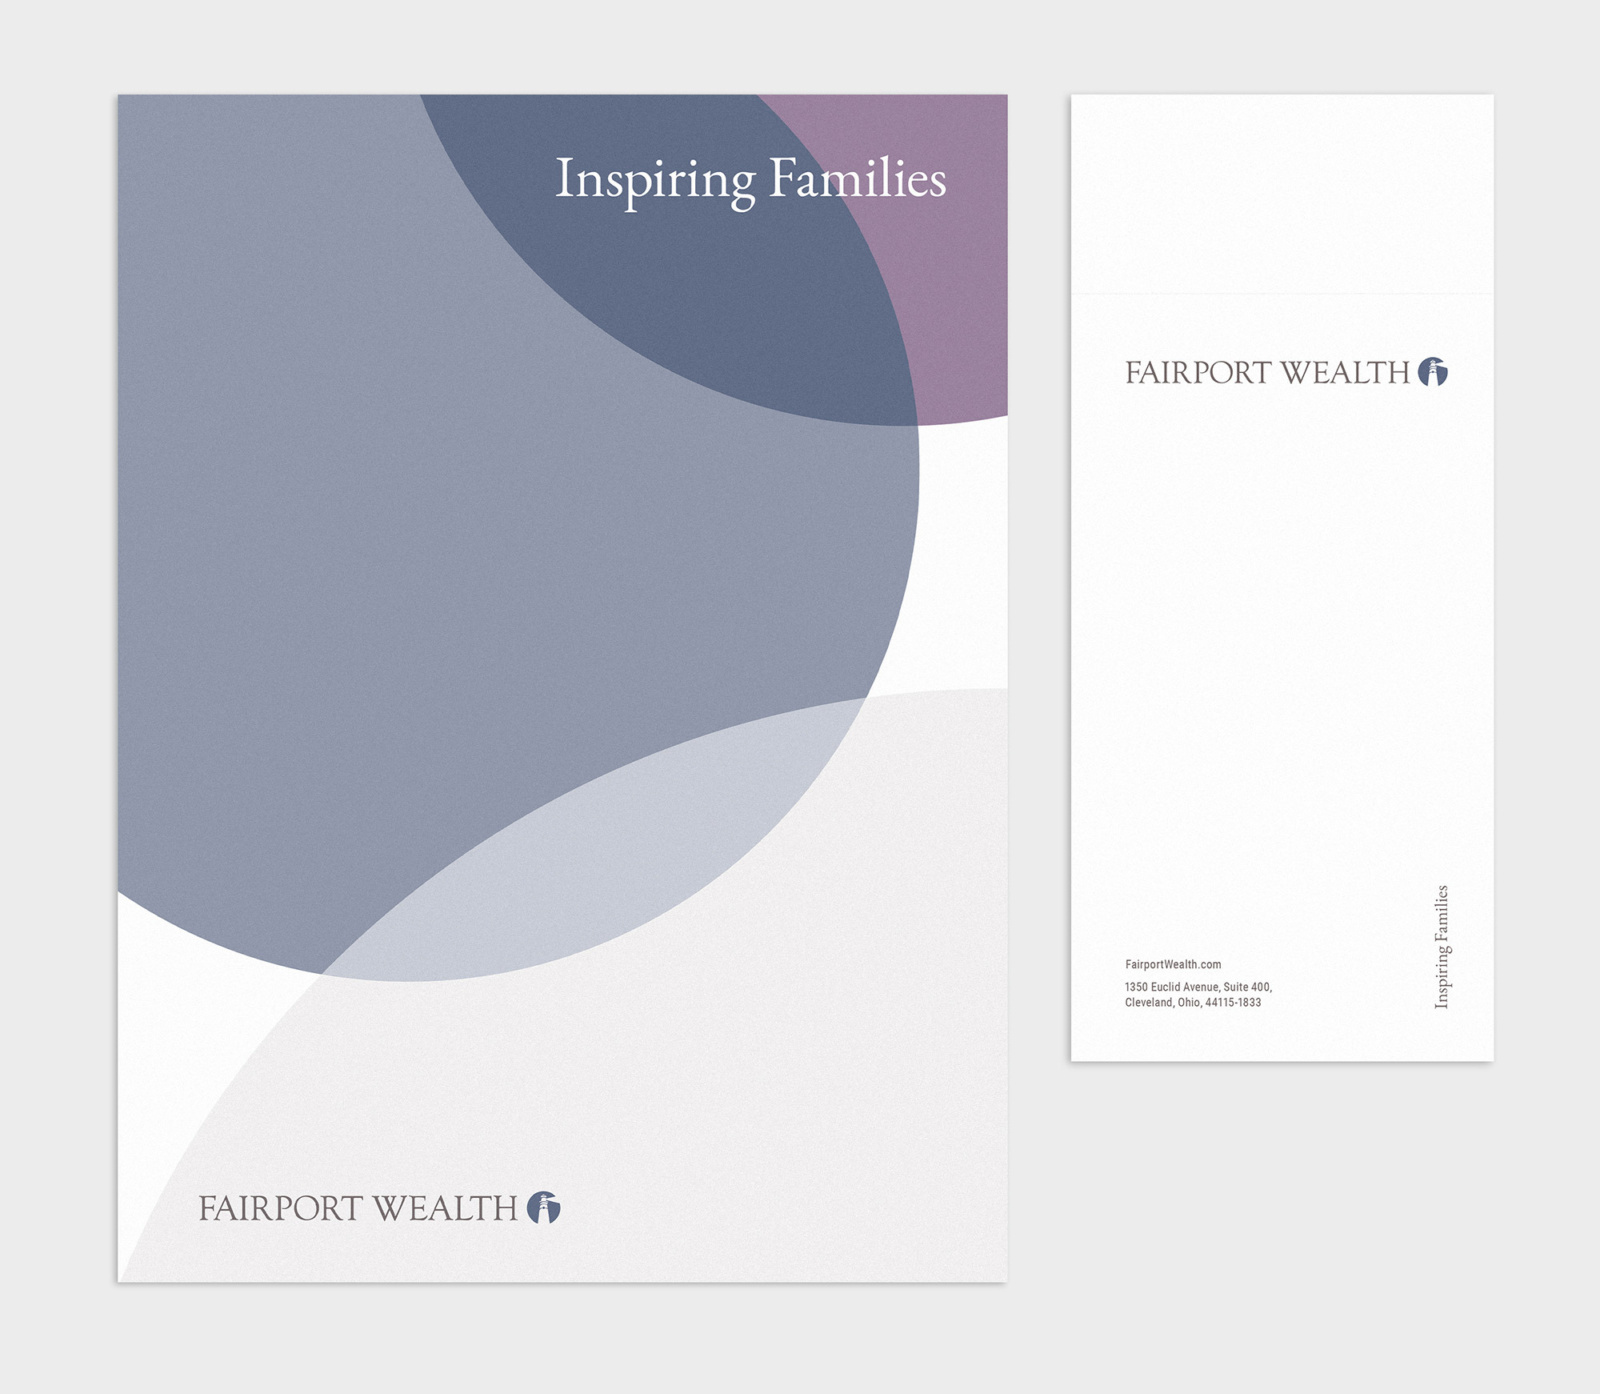 Folder next to a hangtag notecard, which are two print design pieces of the larger Fairport Wealth identity package